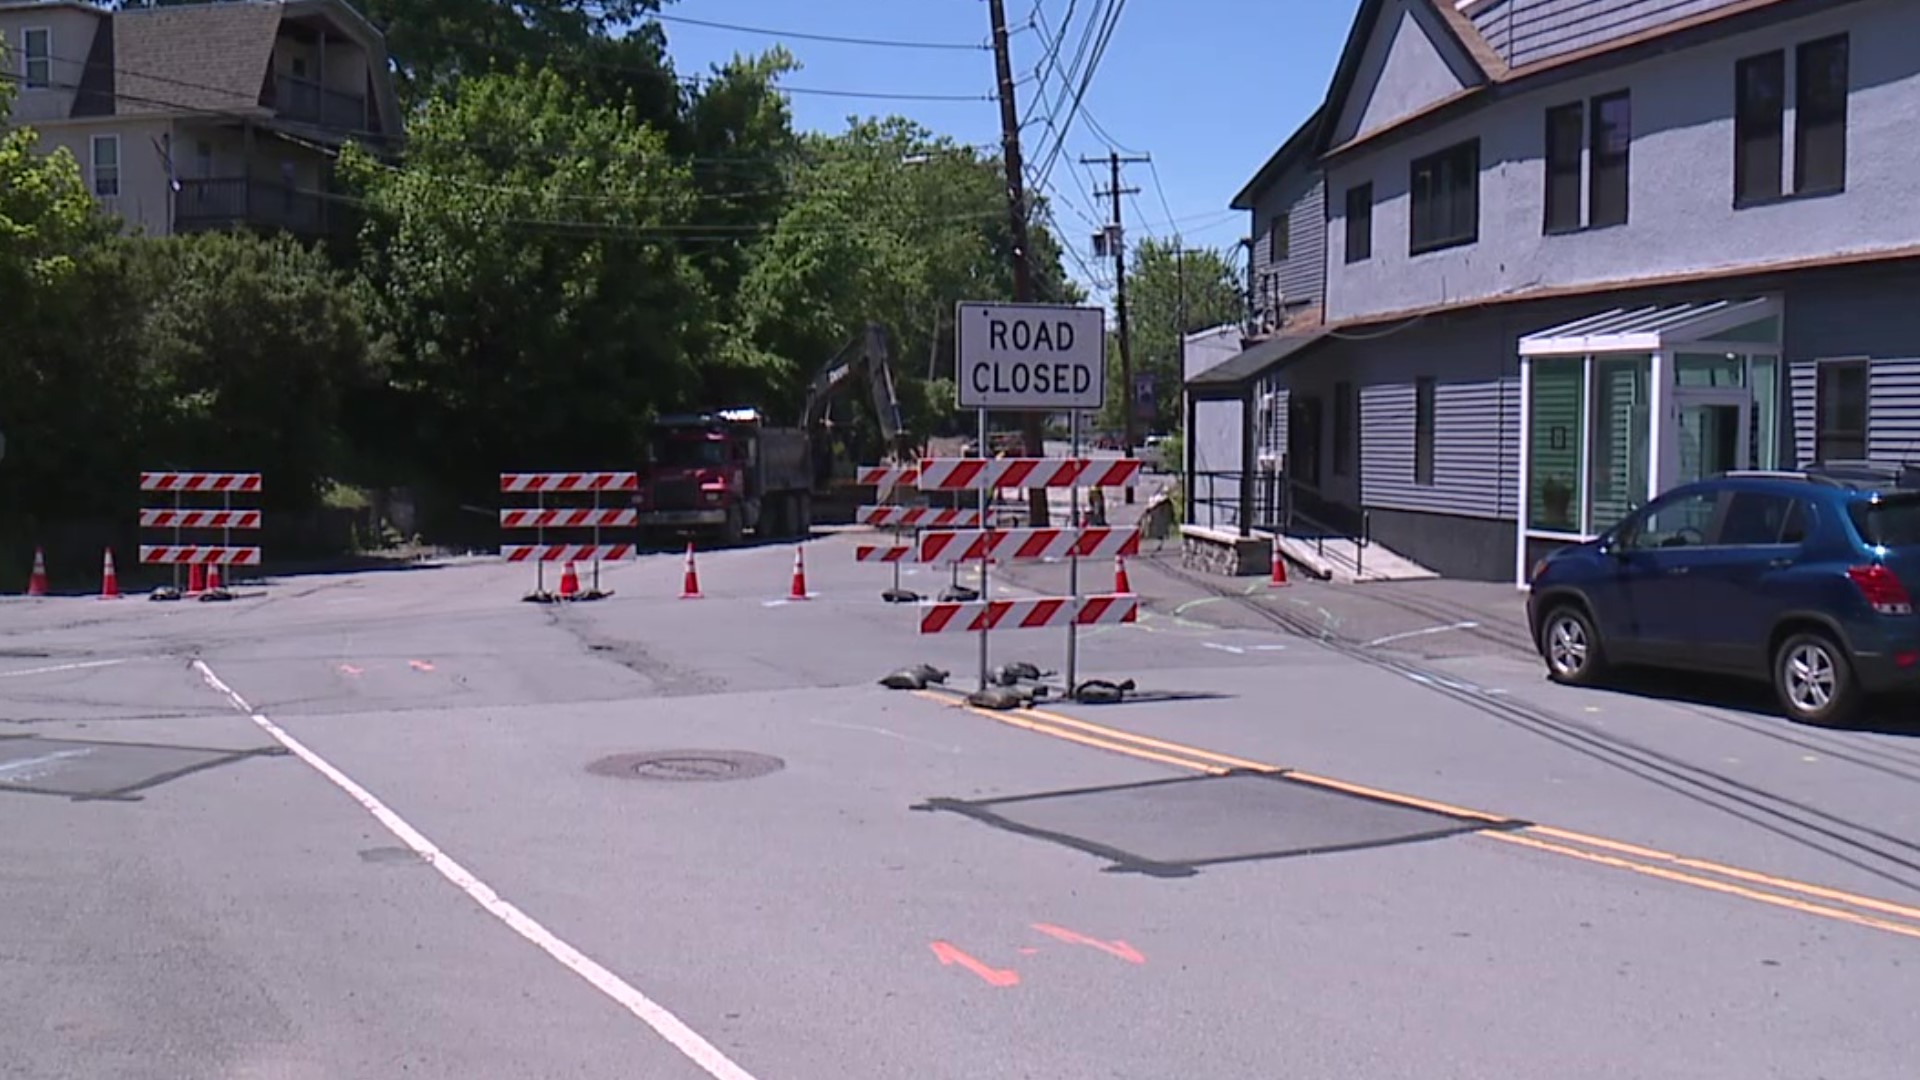 News of a road closure had business owners with storefronts on that street concerned. Newswatch 16's Elizabeth Worthington found out how the work is impacting them.